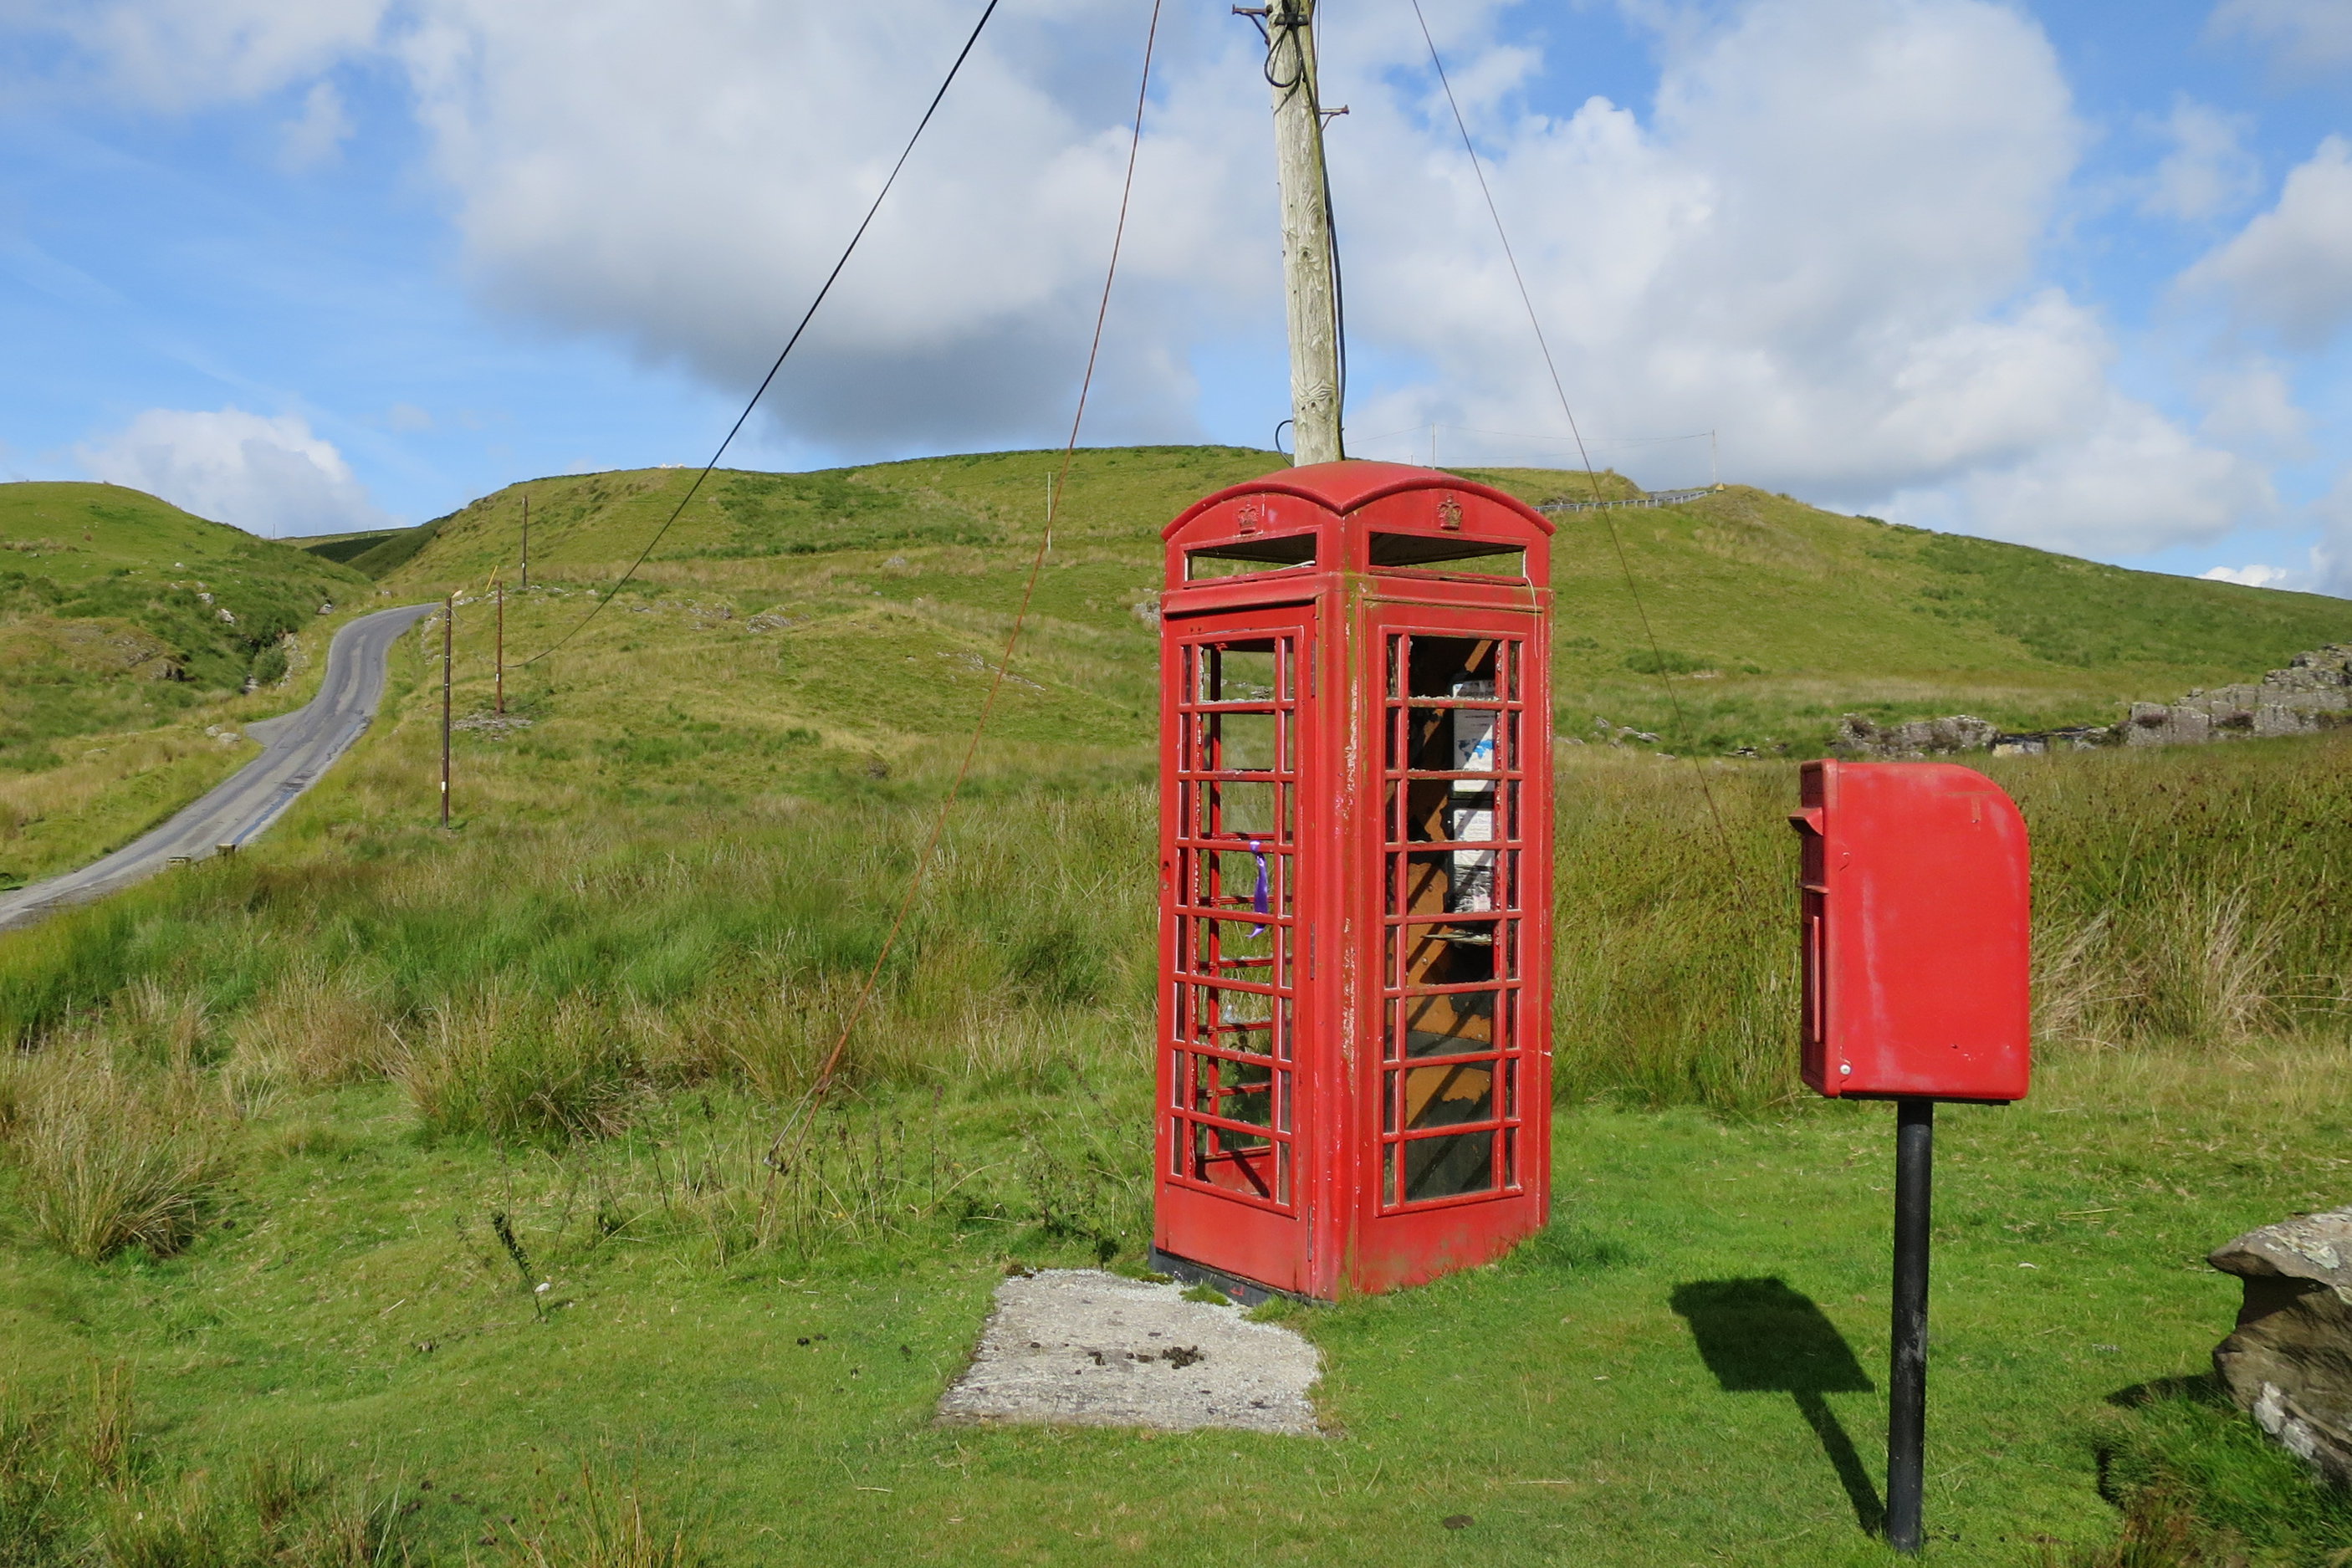 Nantymaen Tregaron in the Cambrian Mountains, home to Wales's remotest phone box. Image by Tasmin Waby / Lonely Planet